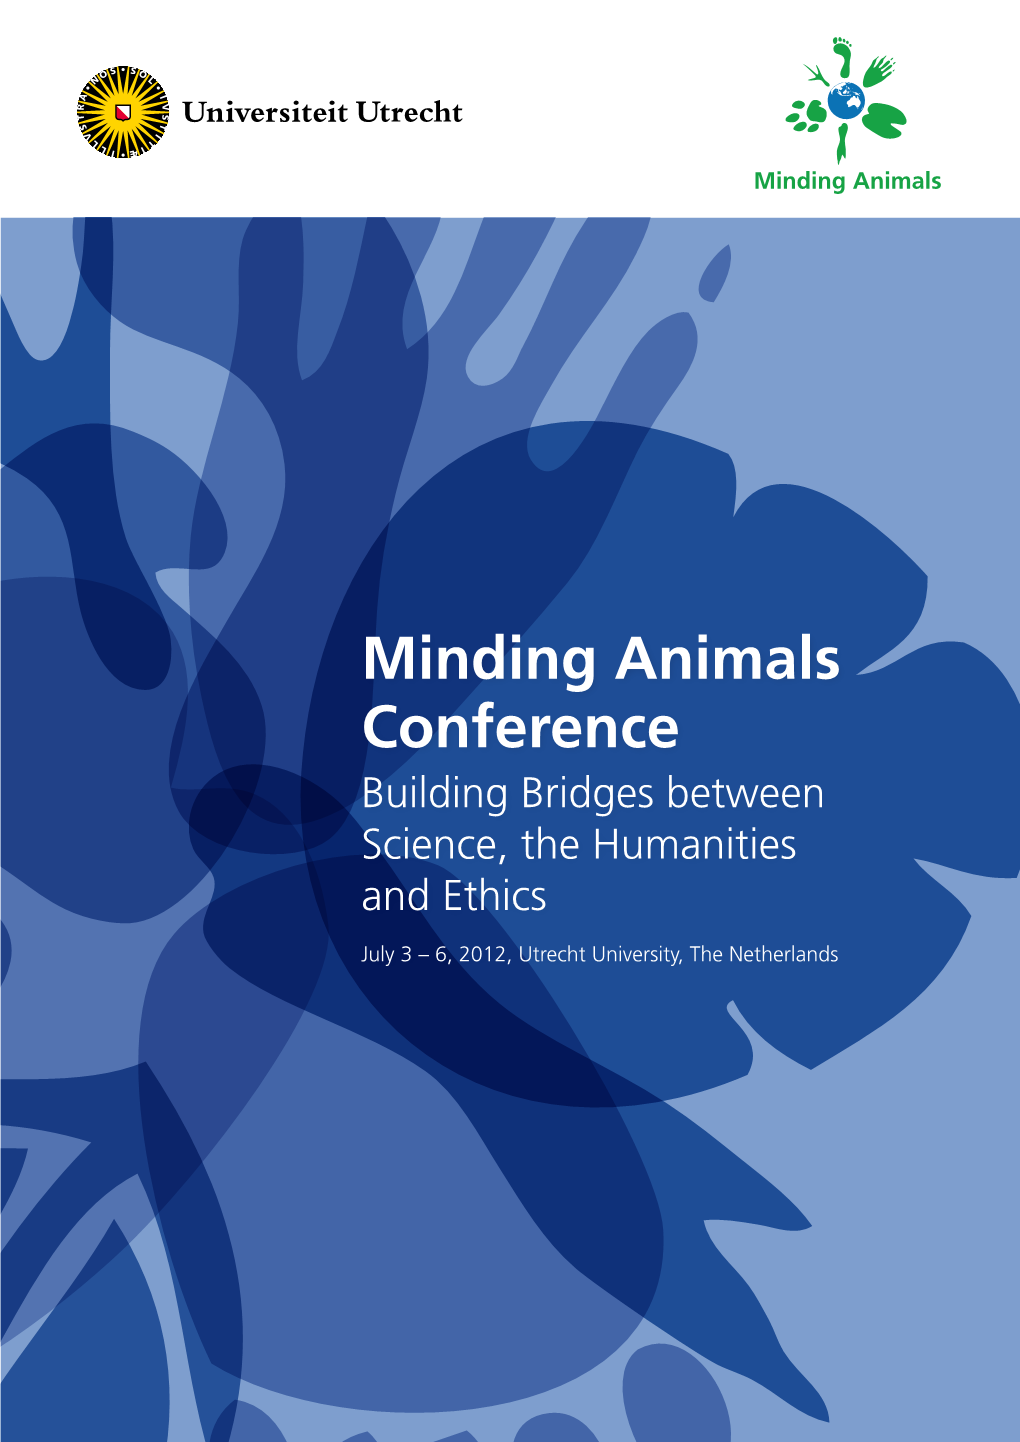 Minding Animals Conference Building Bridges Between Science, the Humanities and Ethics